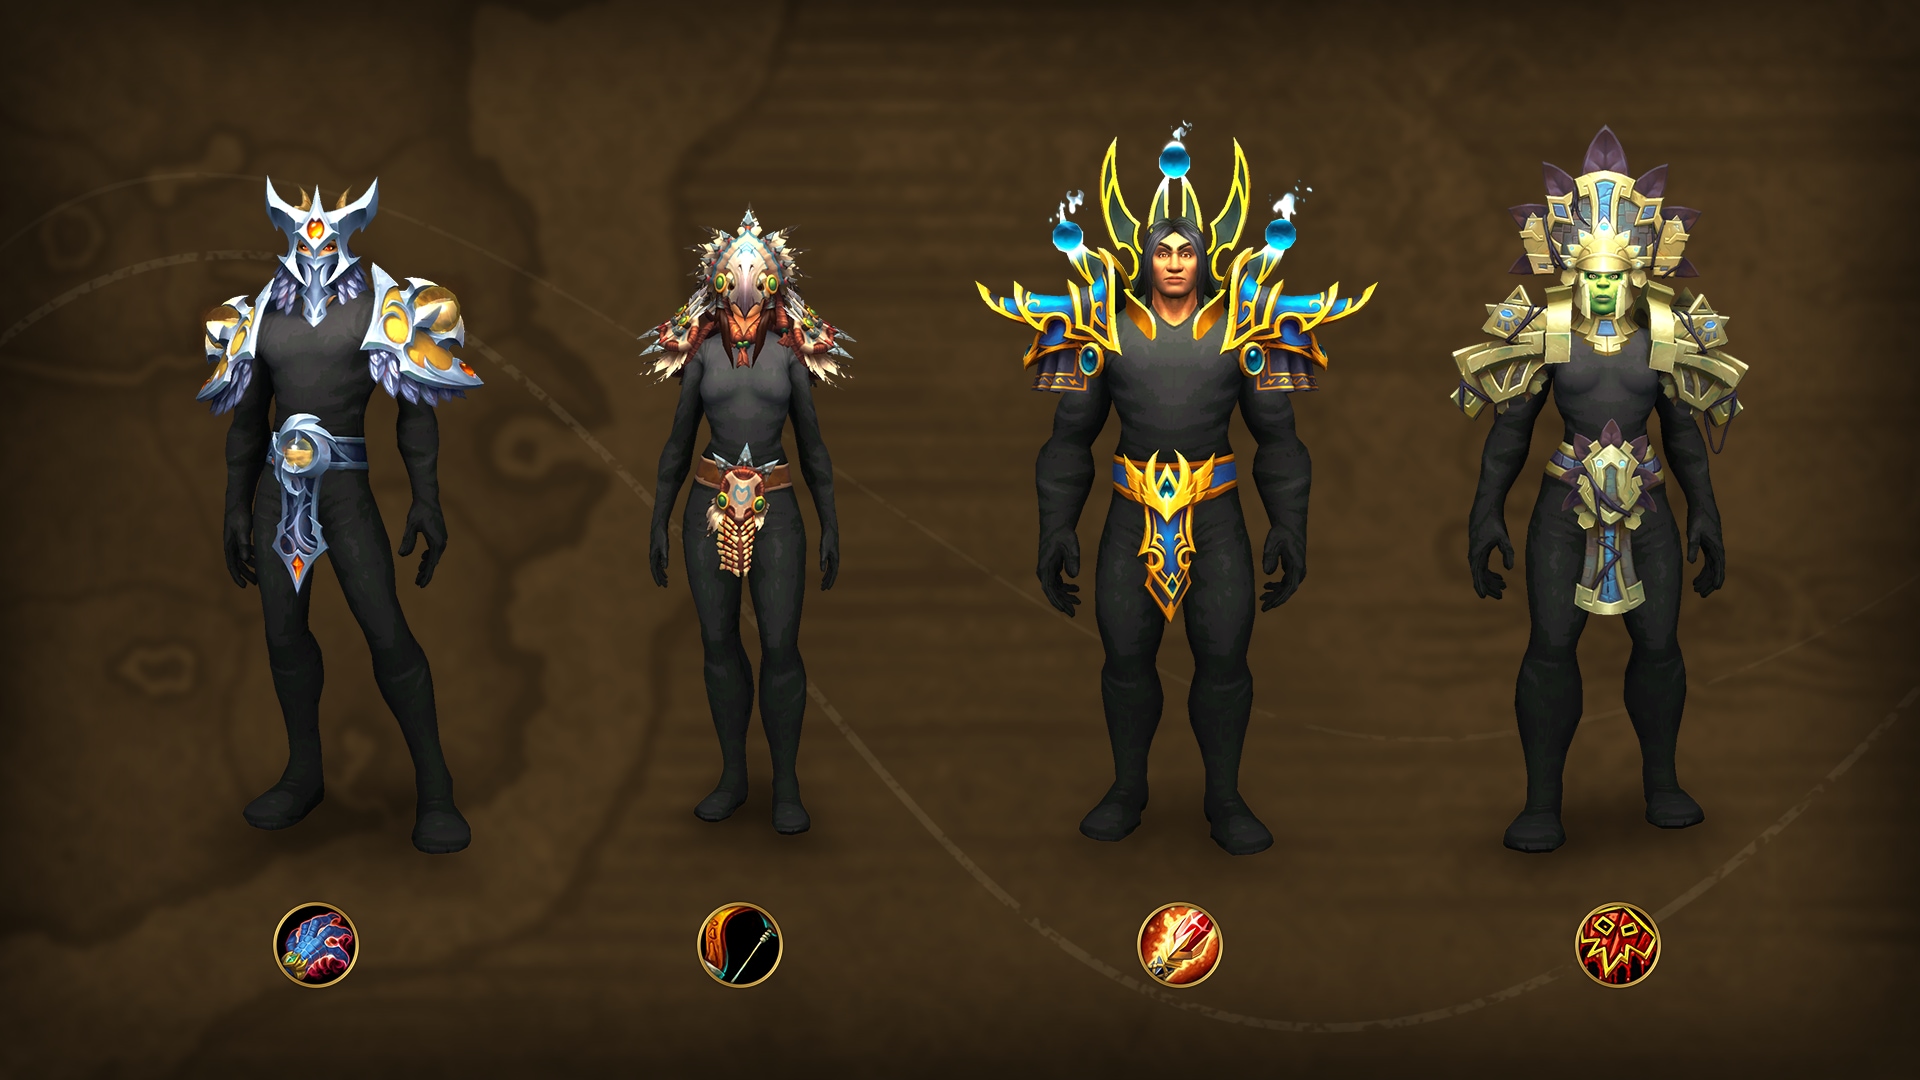 From left to right: Evoker, Hunter, Mage, Shaman